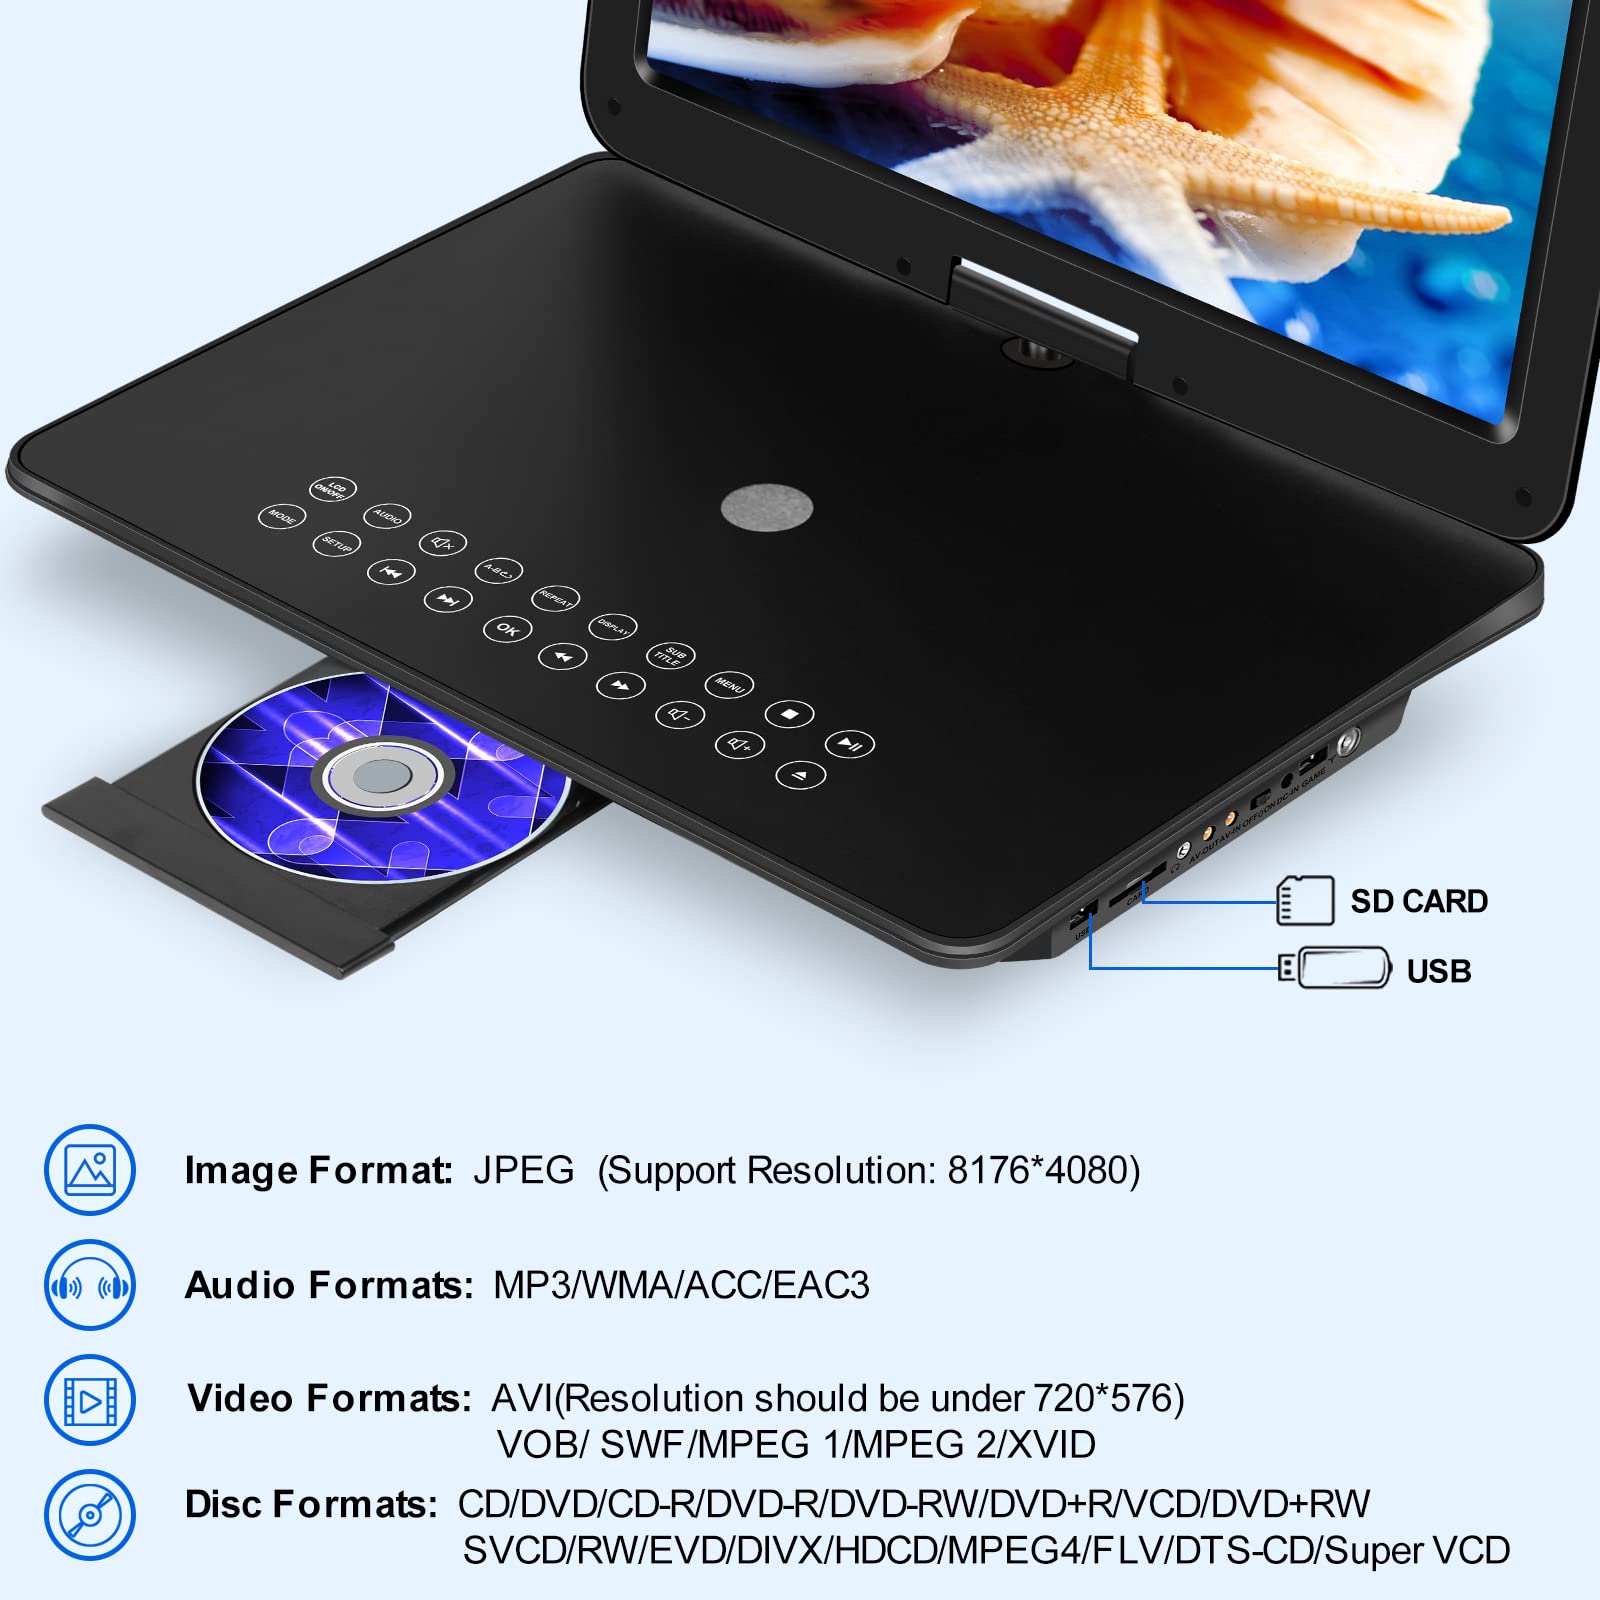 19.6" Portable DVD Player with 17.1" HD Swivel Screen, 4H Rechargeable Battery, Support USB/SD Card/Discs/Sync TV, Dual Stereo Speakers, Last Memory, Car Charger, Remote Control